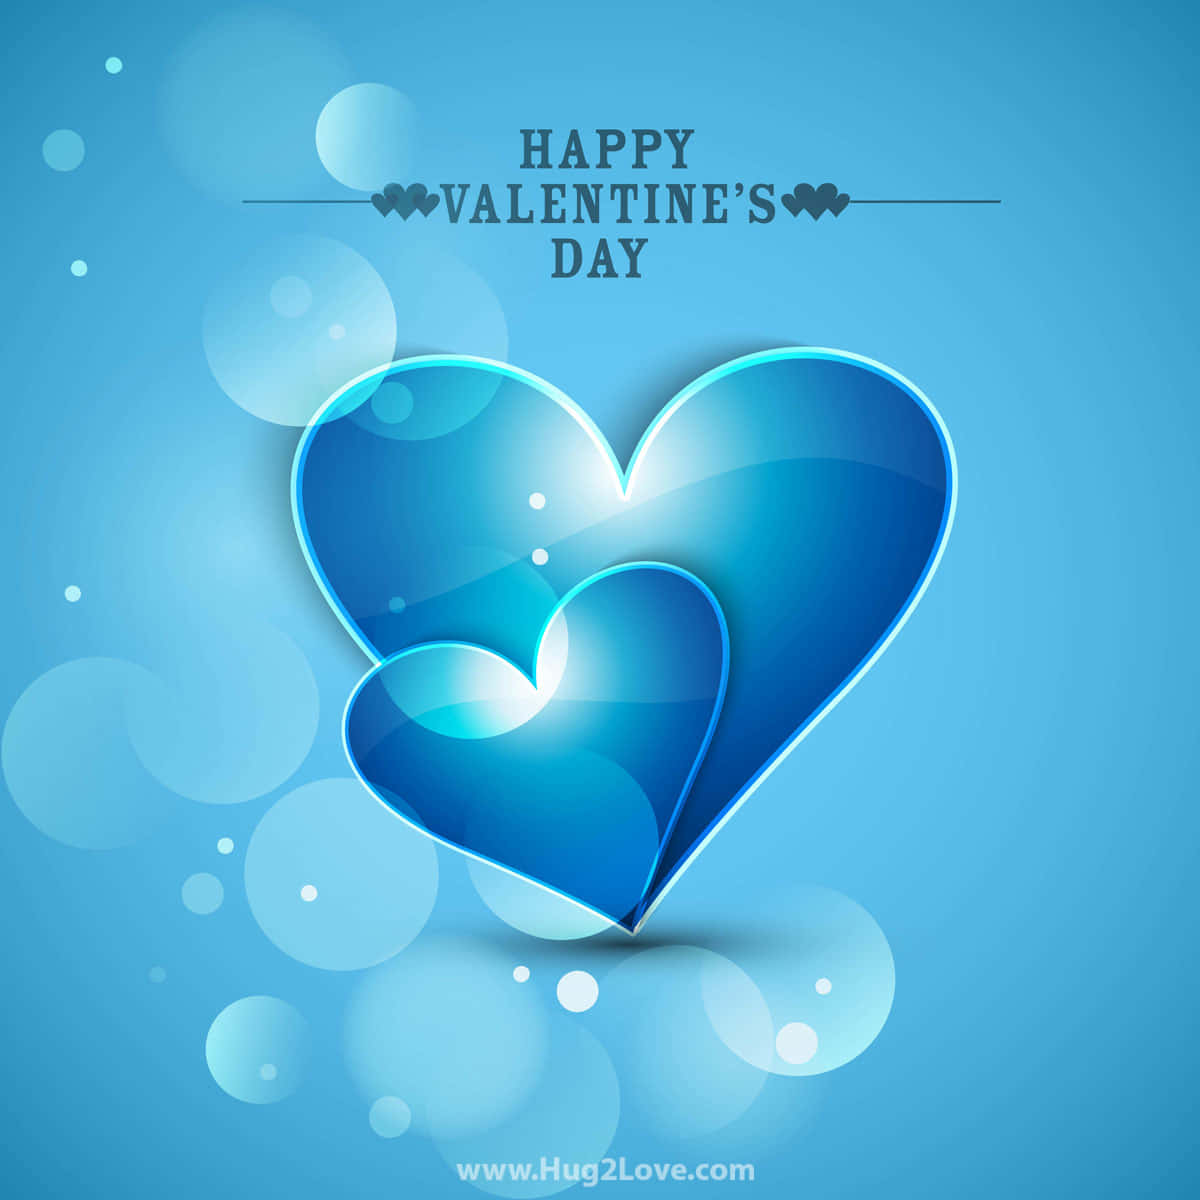 Happy Valentine's Day Background With Two Hearts